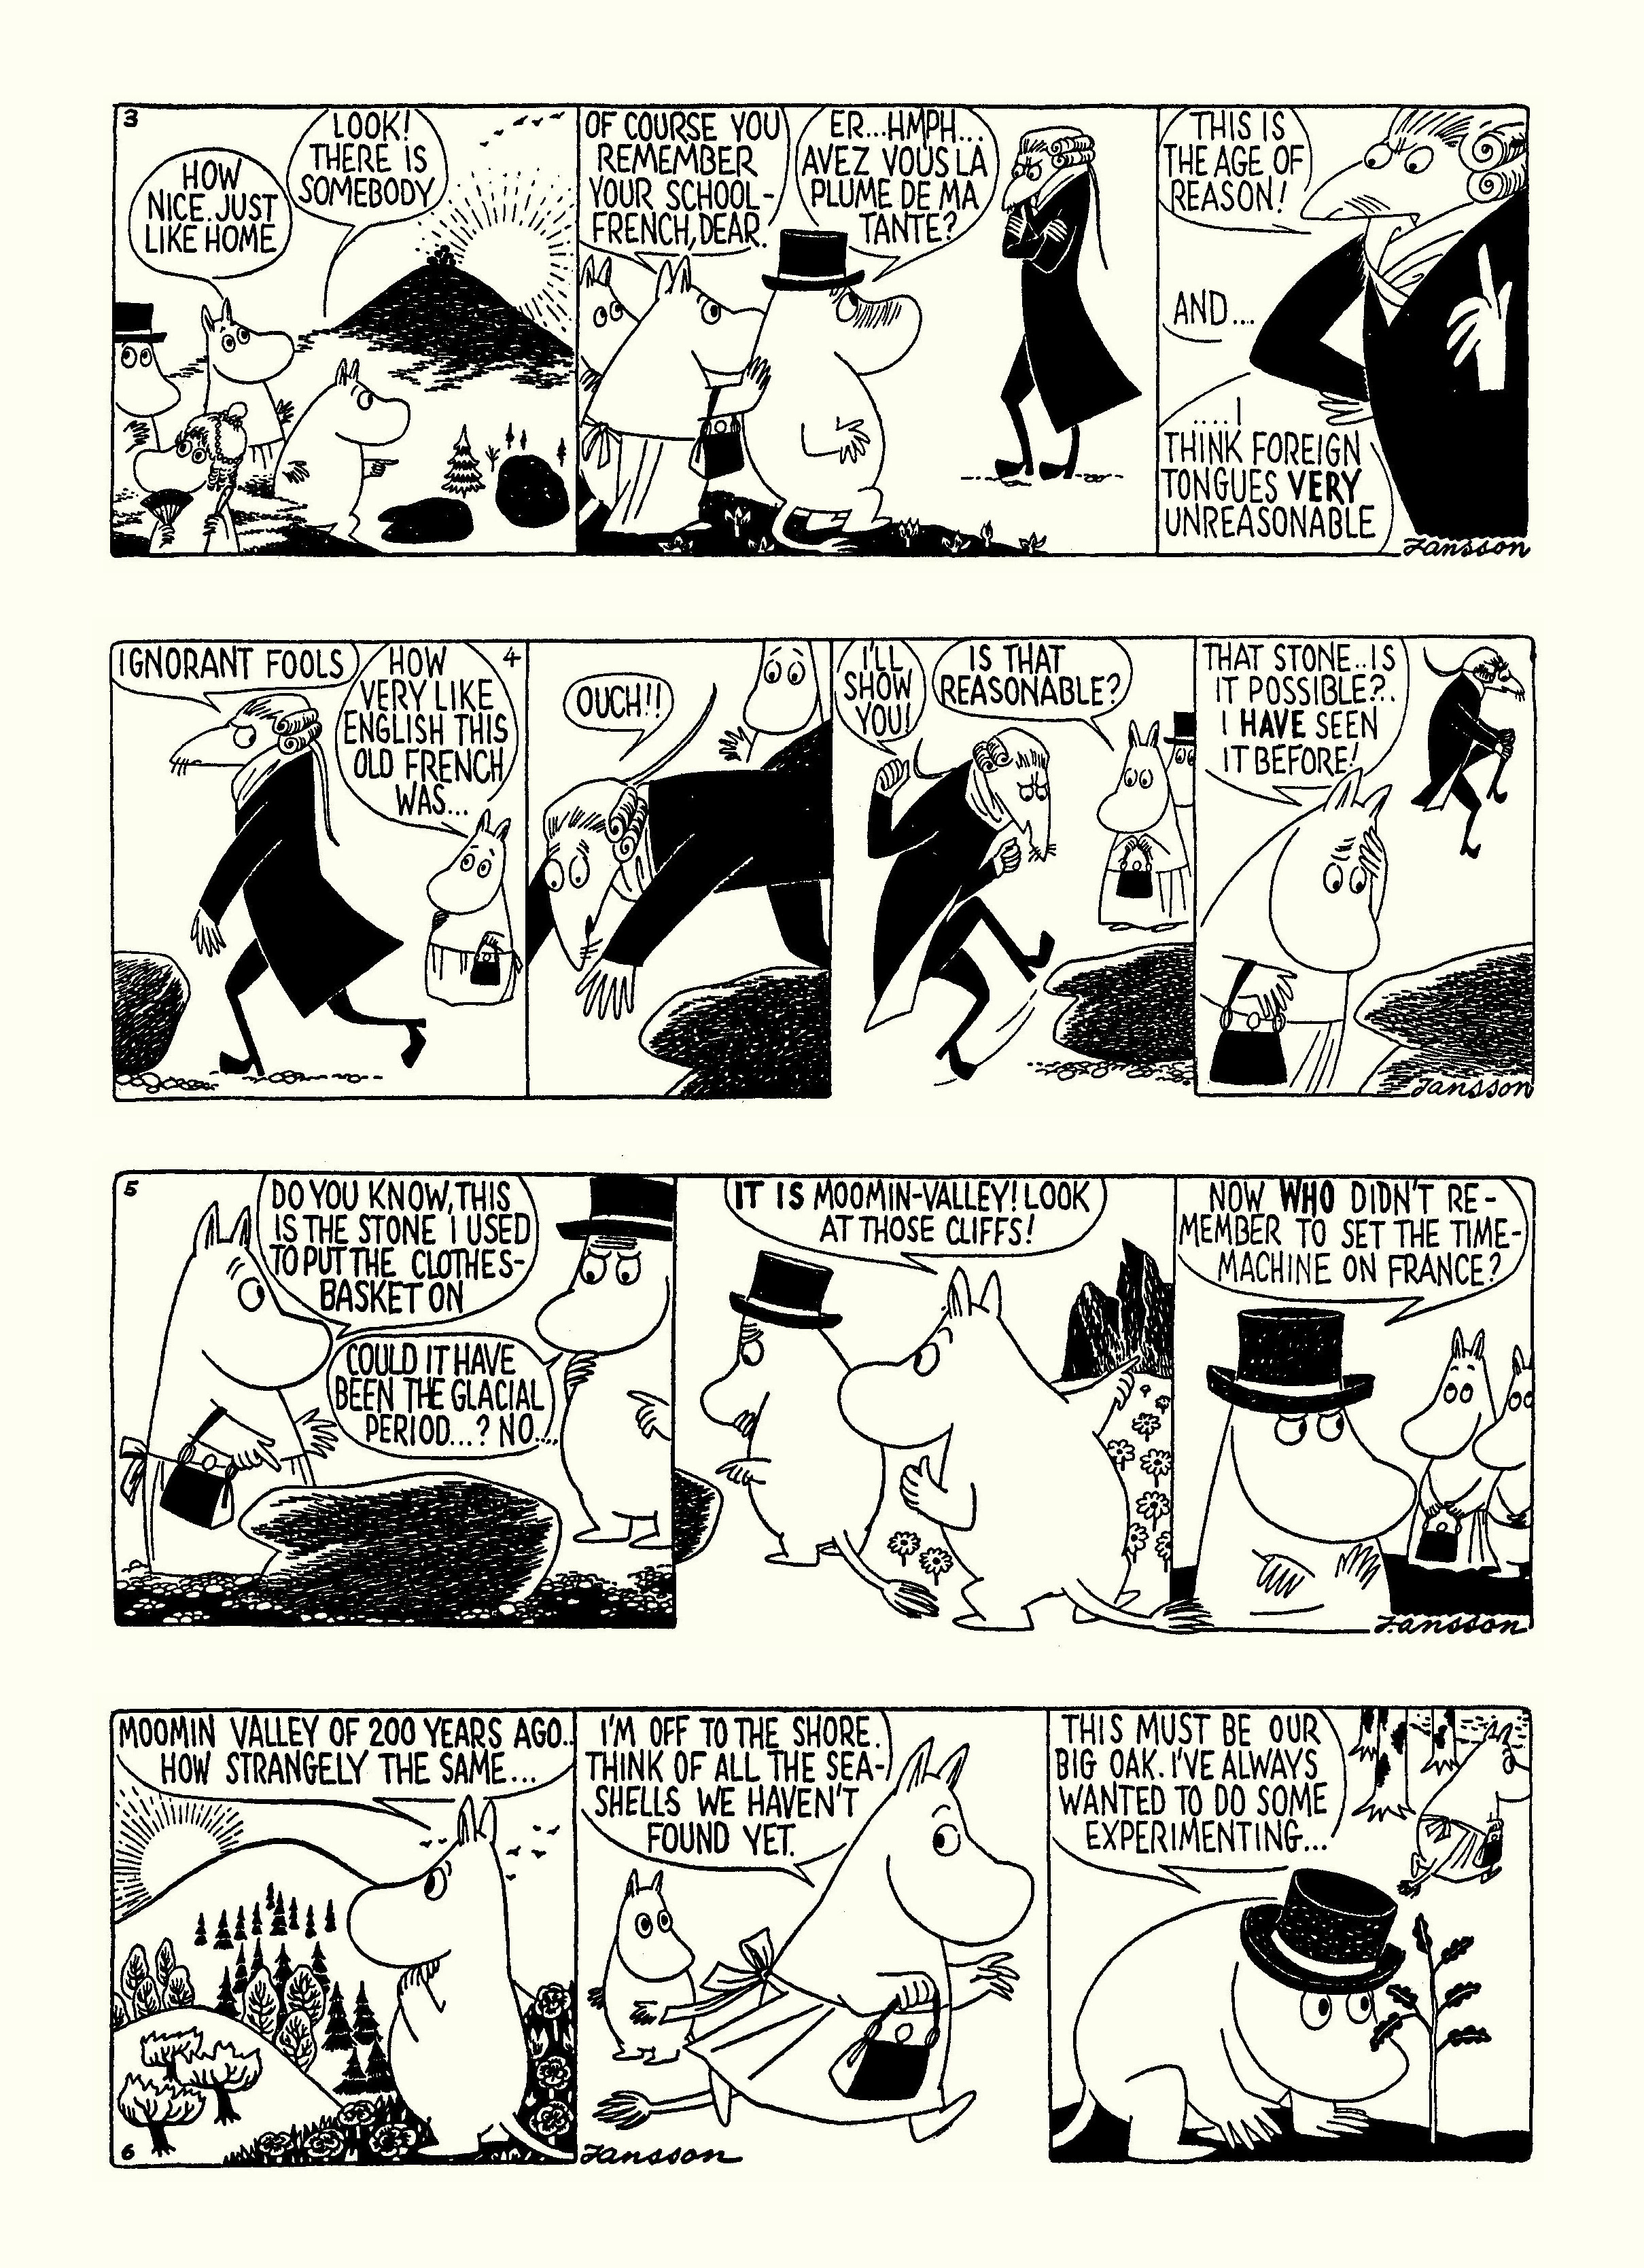 Read online Moomin: The Complete Tove Jansson Comic Strip comic -  Issue # TPB 4 - 24